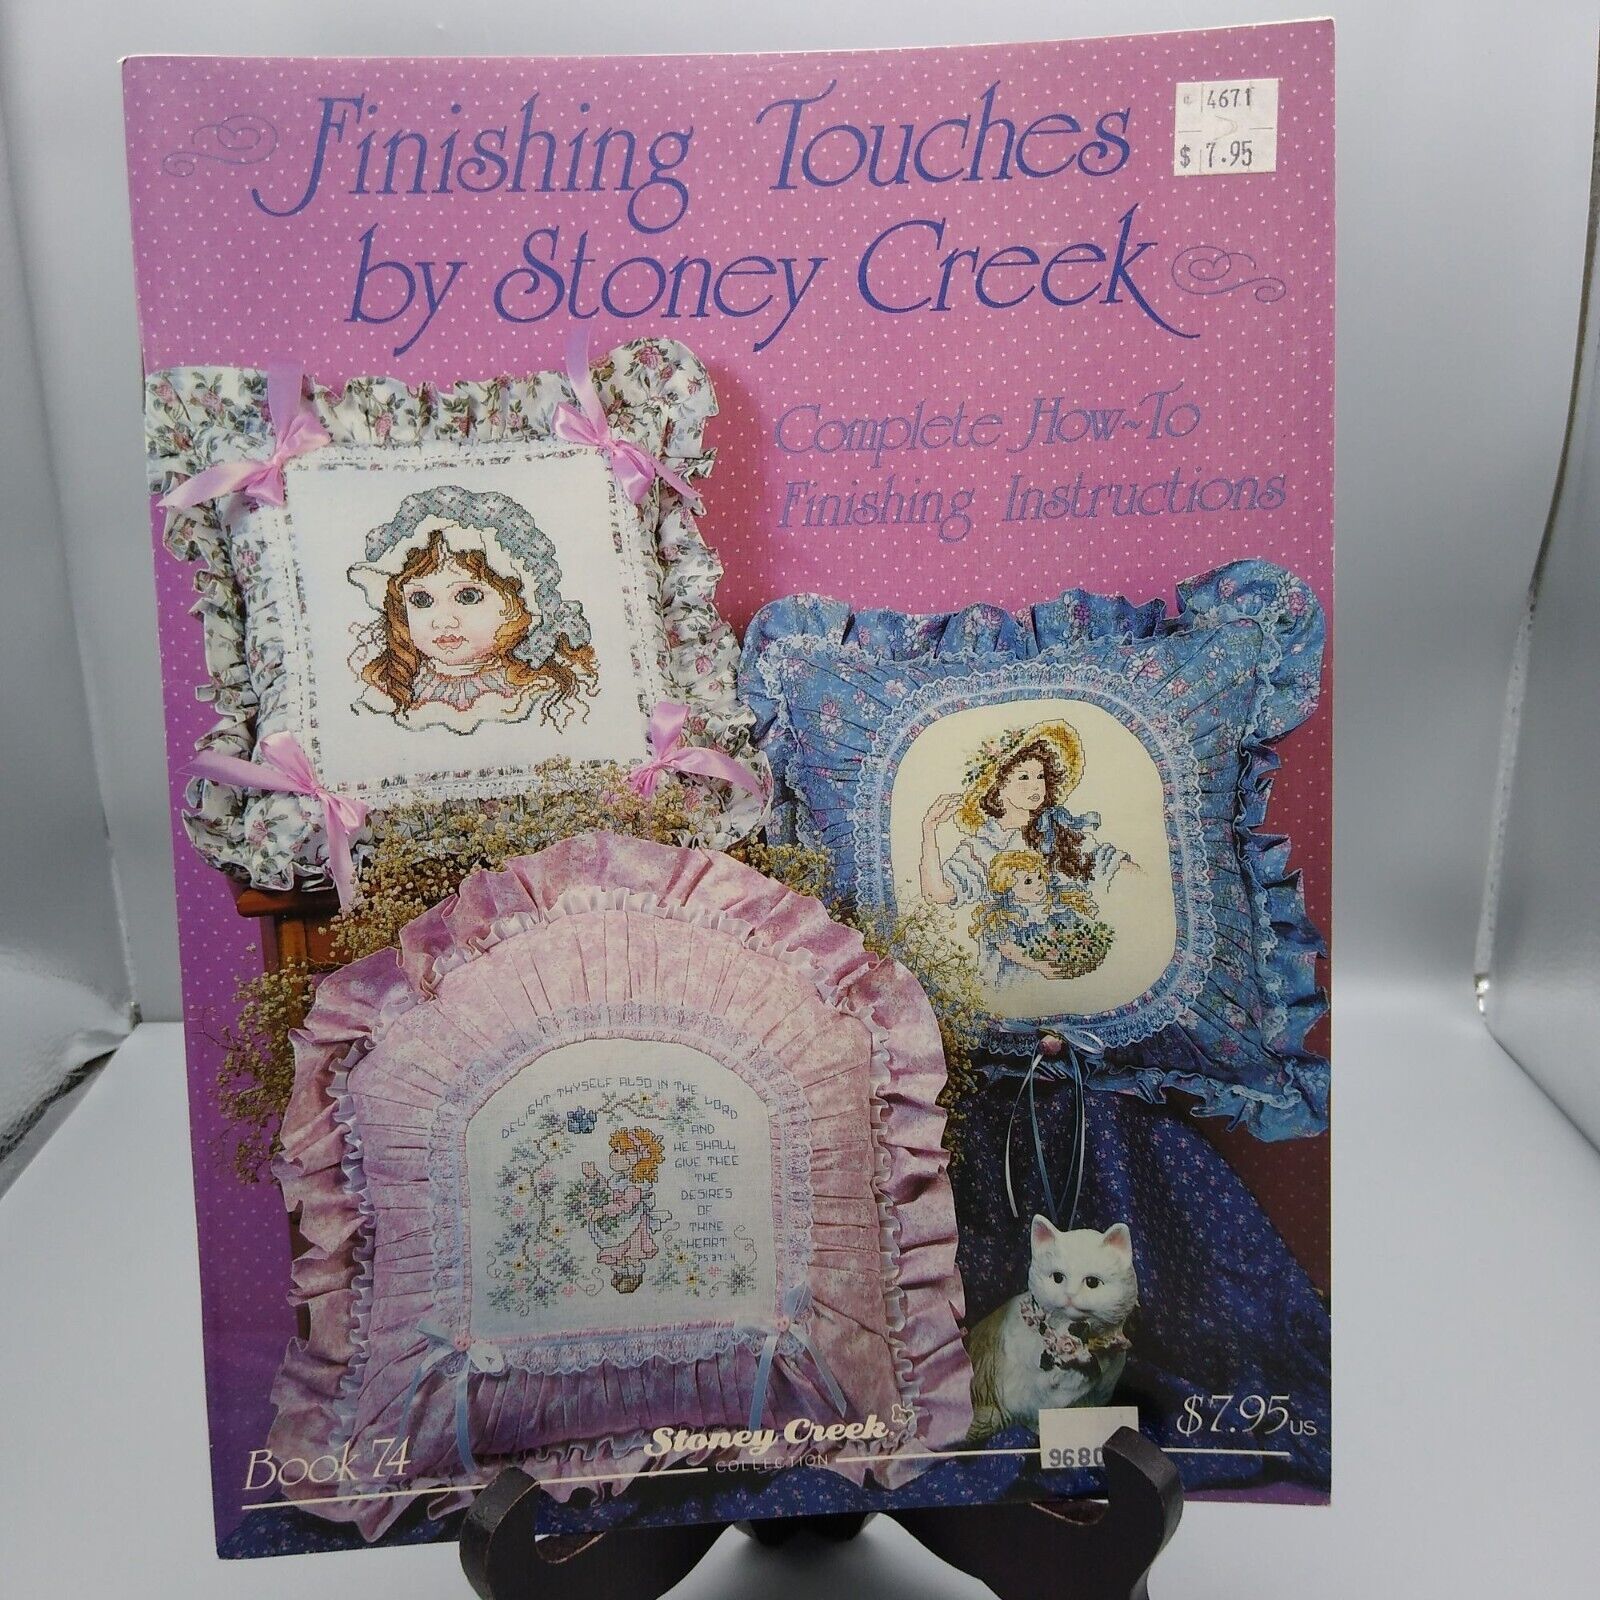 Vintage Cross Stitch Patterns, Finishing Touches, 1990 Stoney Creek Collection - $7.85